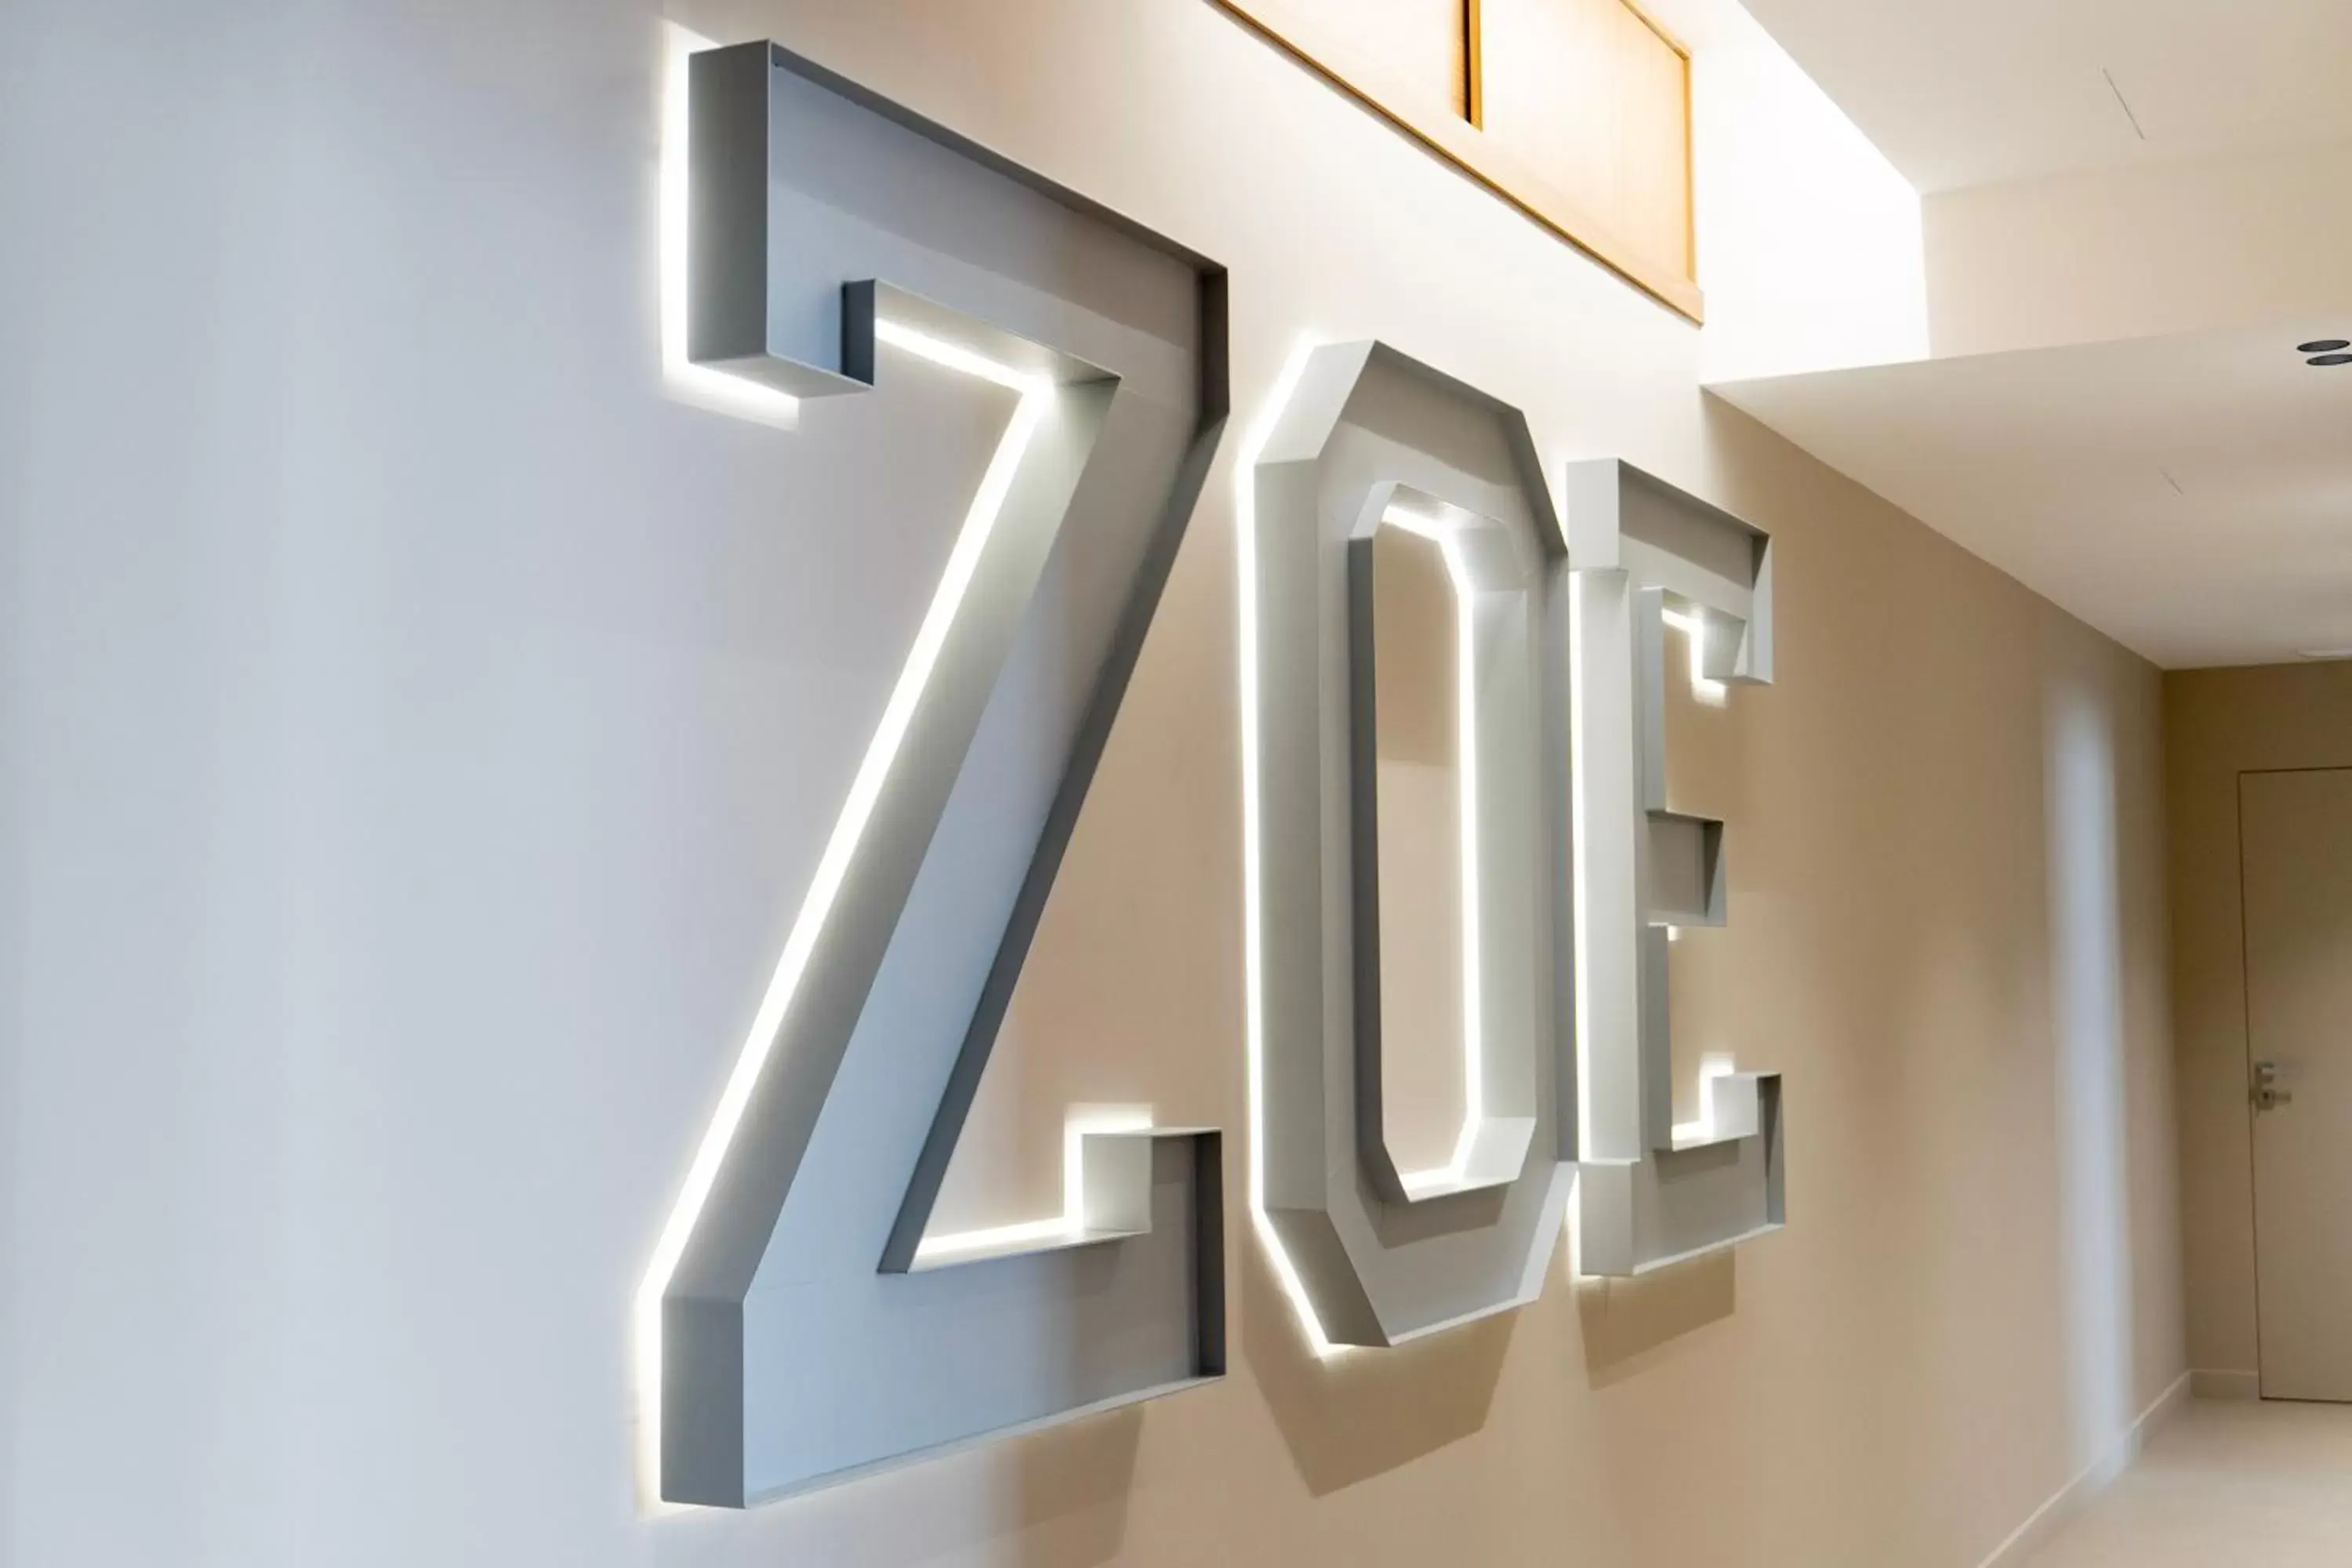 Property logo or sign in ZOE LUXURY SUITES